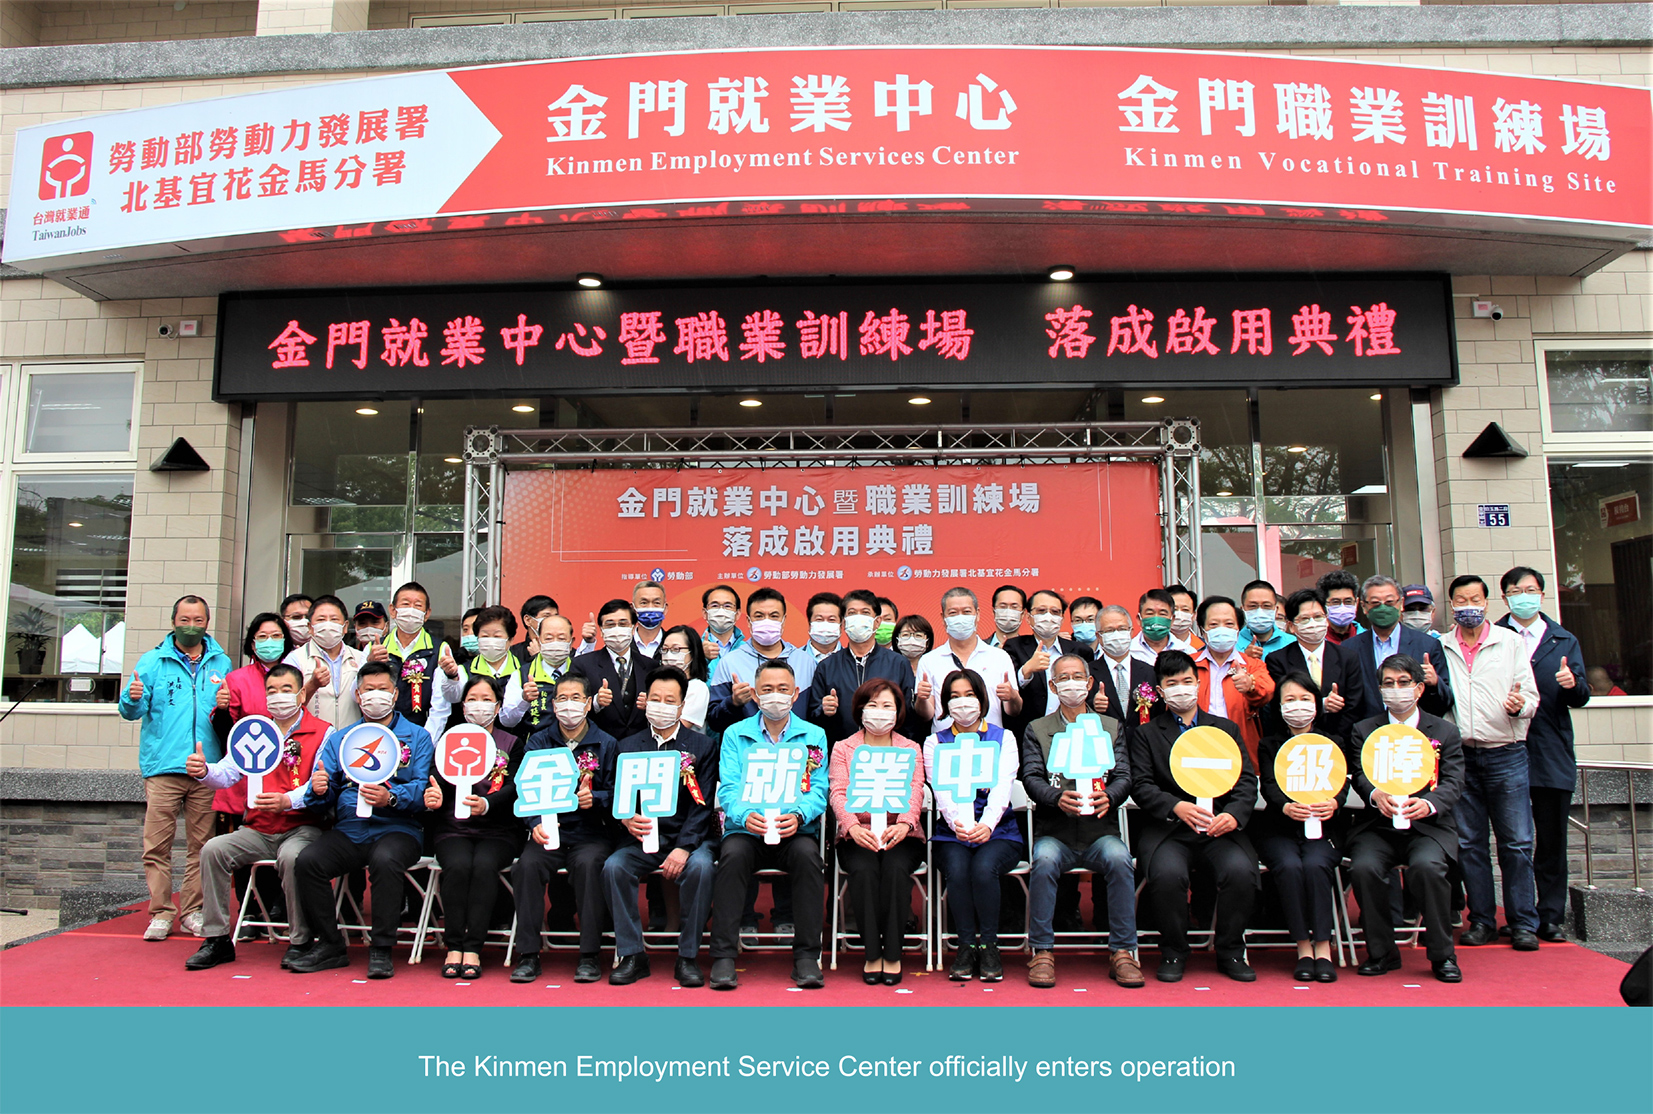 The Kinmen Employment Service Center Officially Opened On April 19, 2022 to Provide the Three-in-one Service of Employment, Occupational Training, and Skill Testing for Citizens of Kinmen